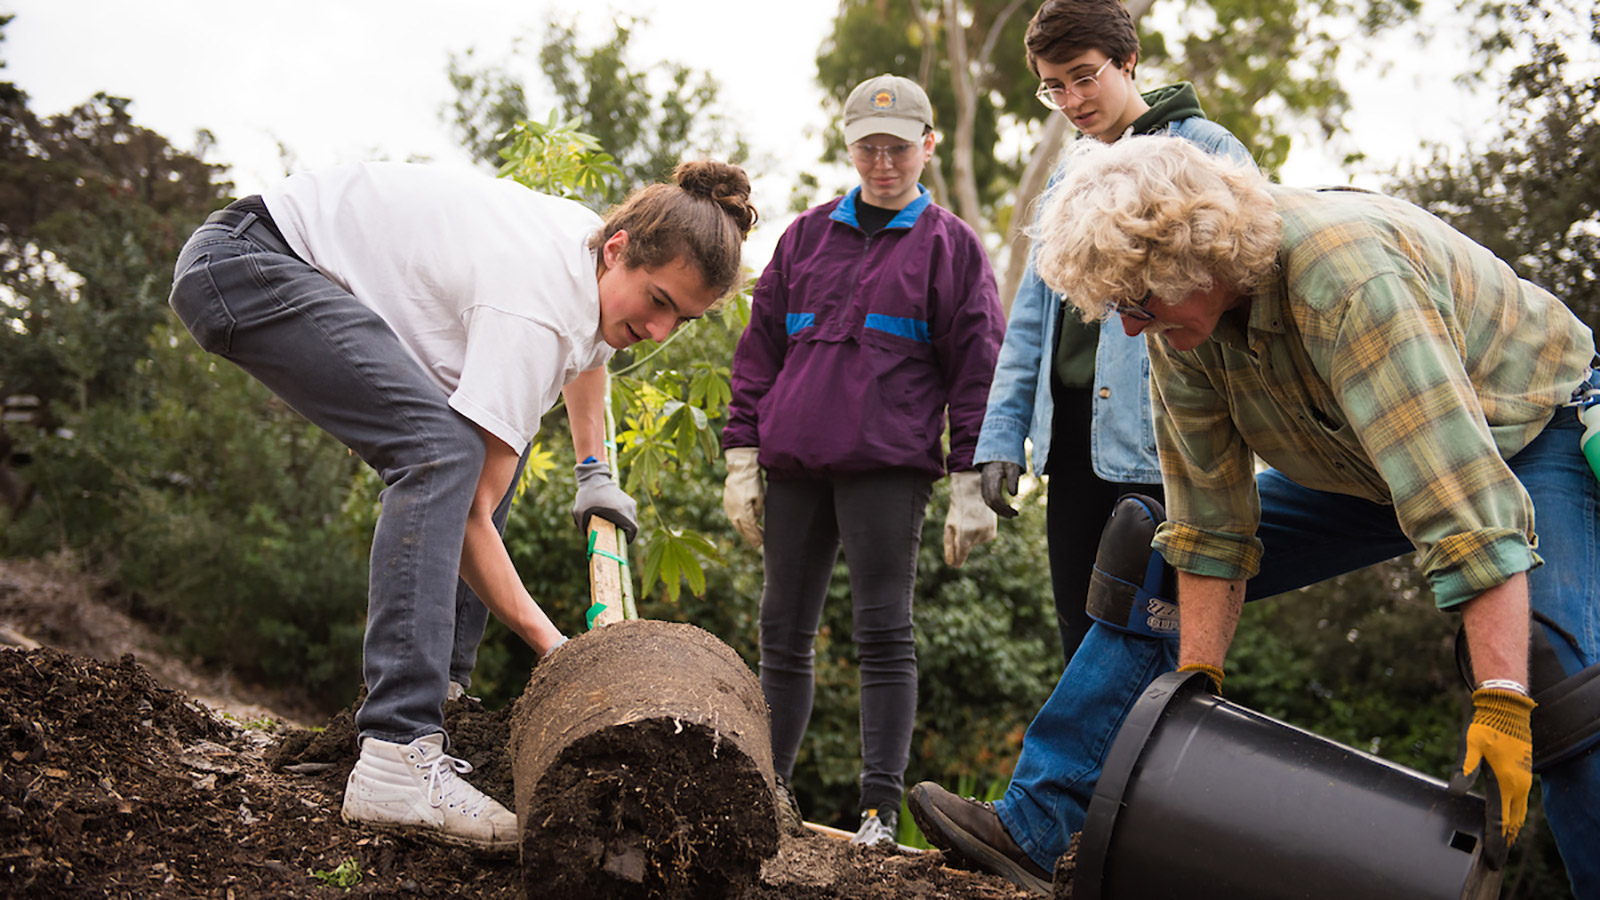 Michael Bush, the Director of the San Luis Obispo Botanical Garden, planting a tree with students